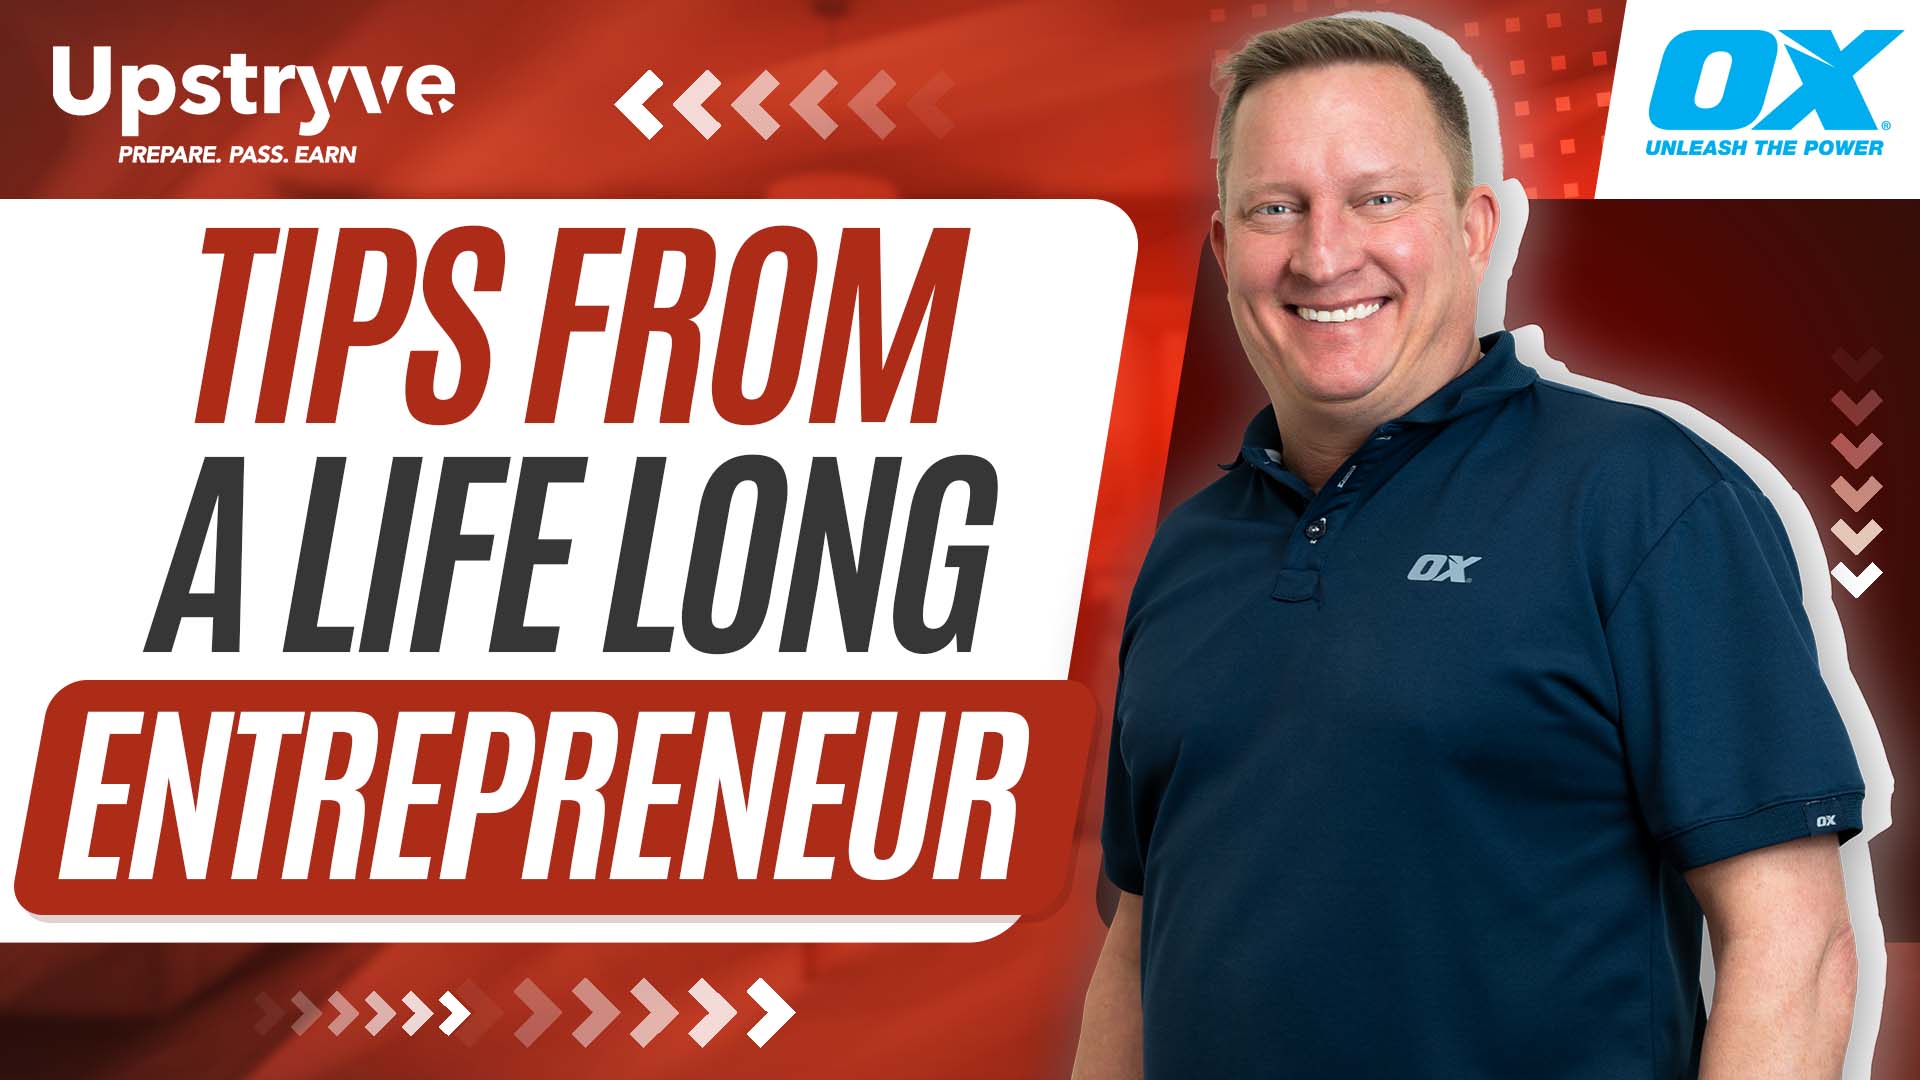 CEO of OX Tools John Cunningham explains the opportunities the trades provide for aspiring tradespeople and future entrepreneurs. This path can be fulfilling and exciting, but it's not for everyone and that's ok. Watch today's video for some great insight from a lifelong successful entrepreneur.